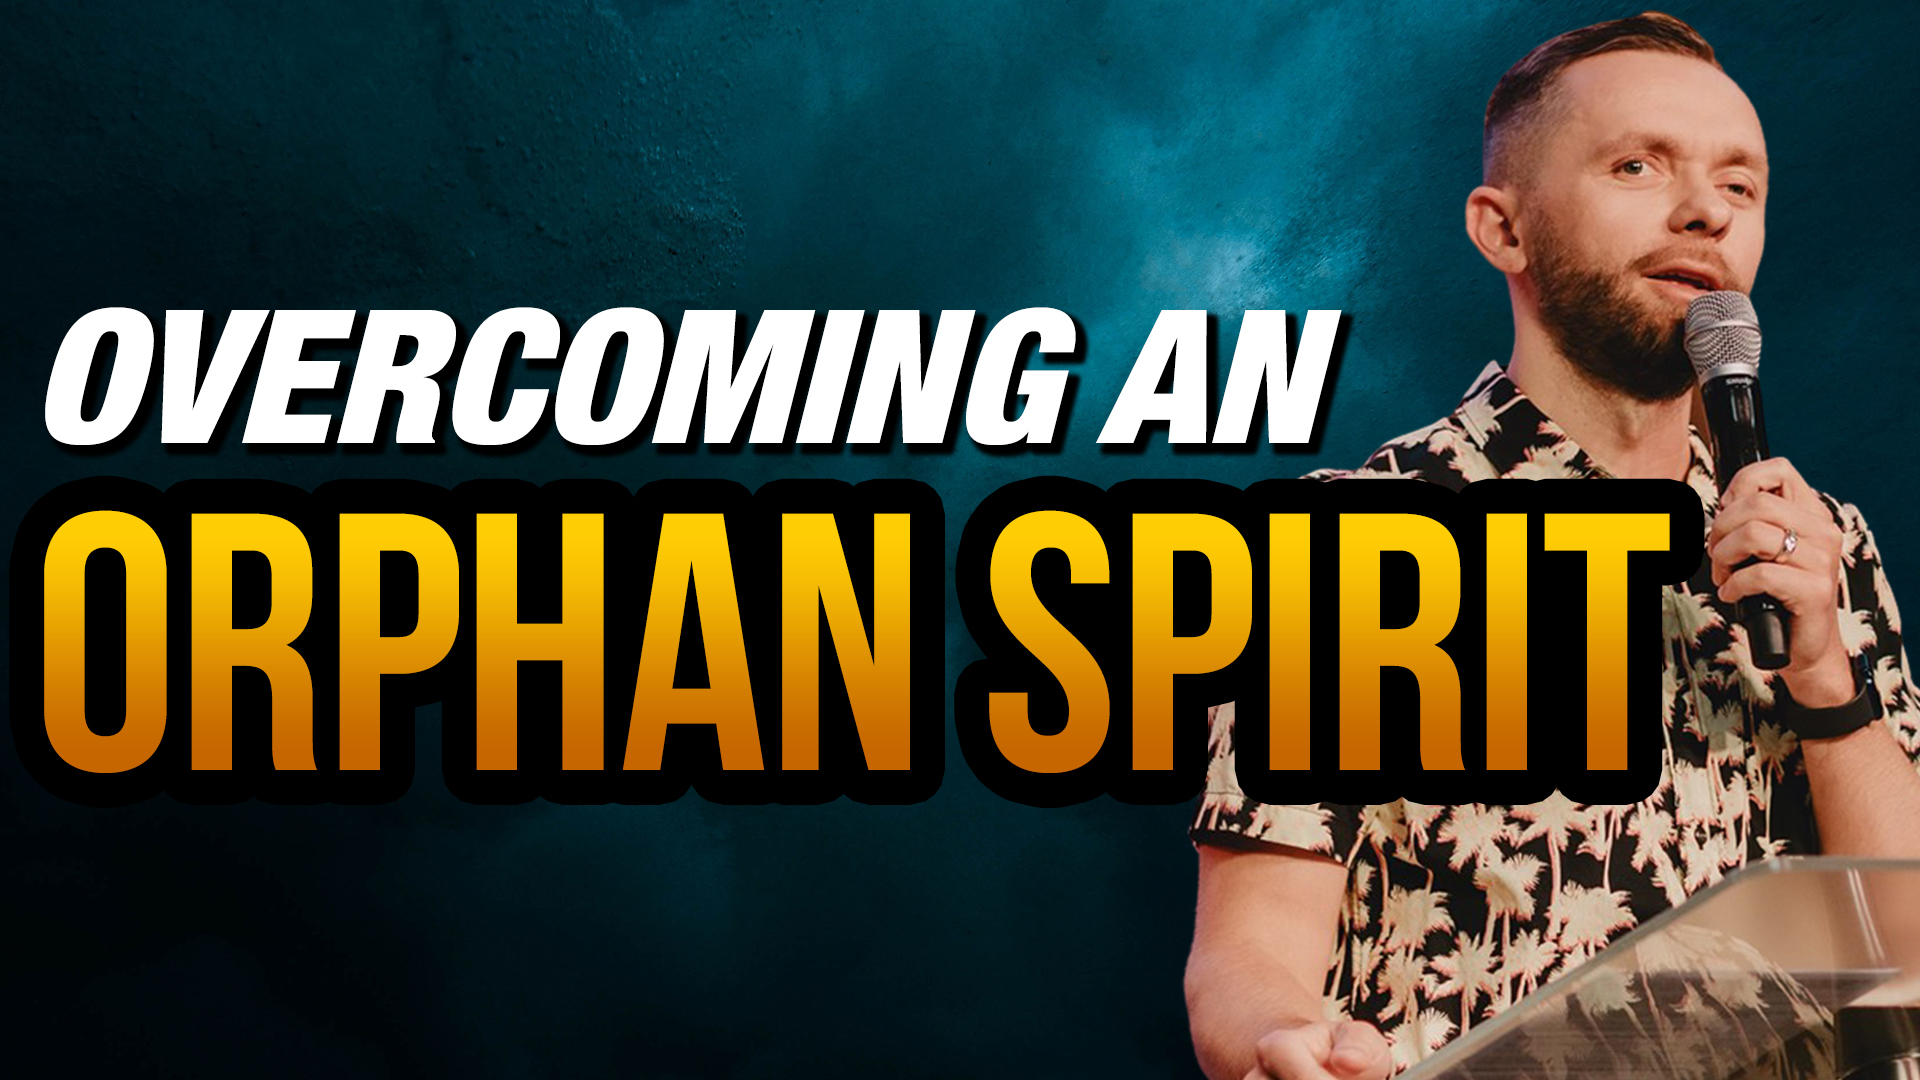 Featured image for 'Overcoming an Orphan Spirit'